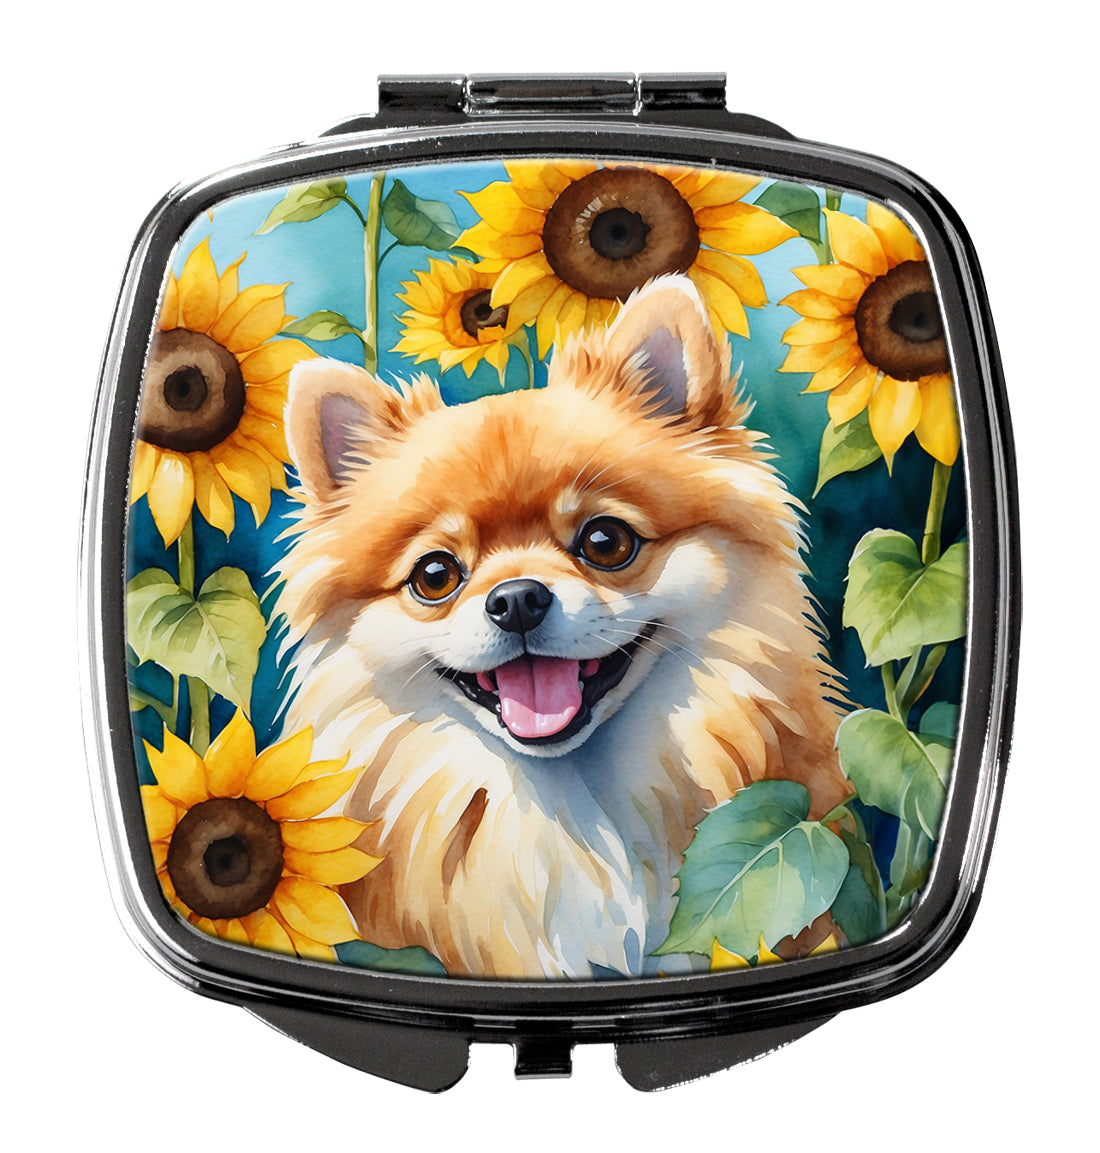 Buy this Pomeranian in Sunflowers Compact Mirror